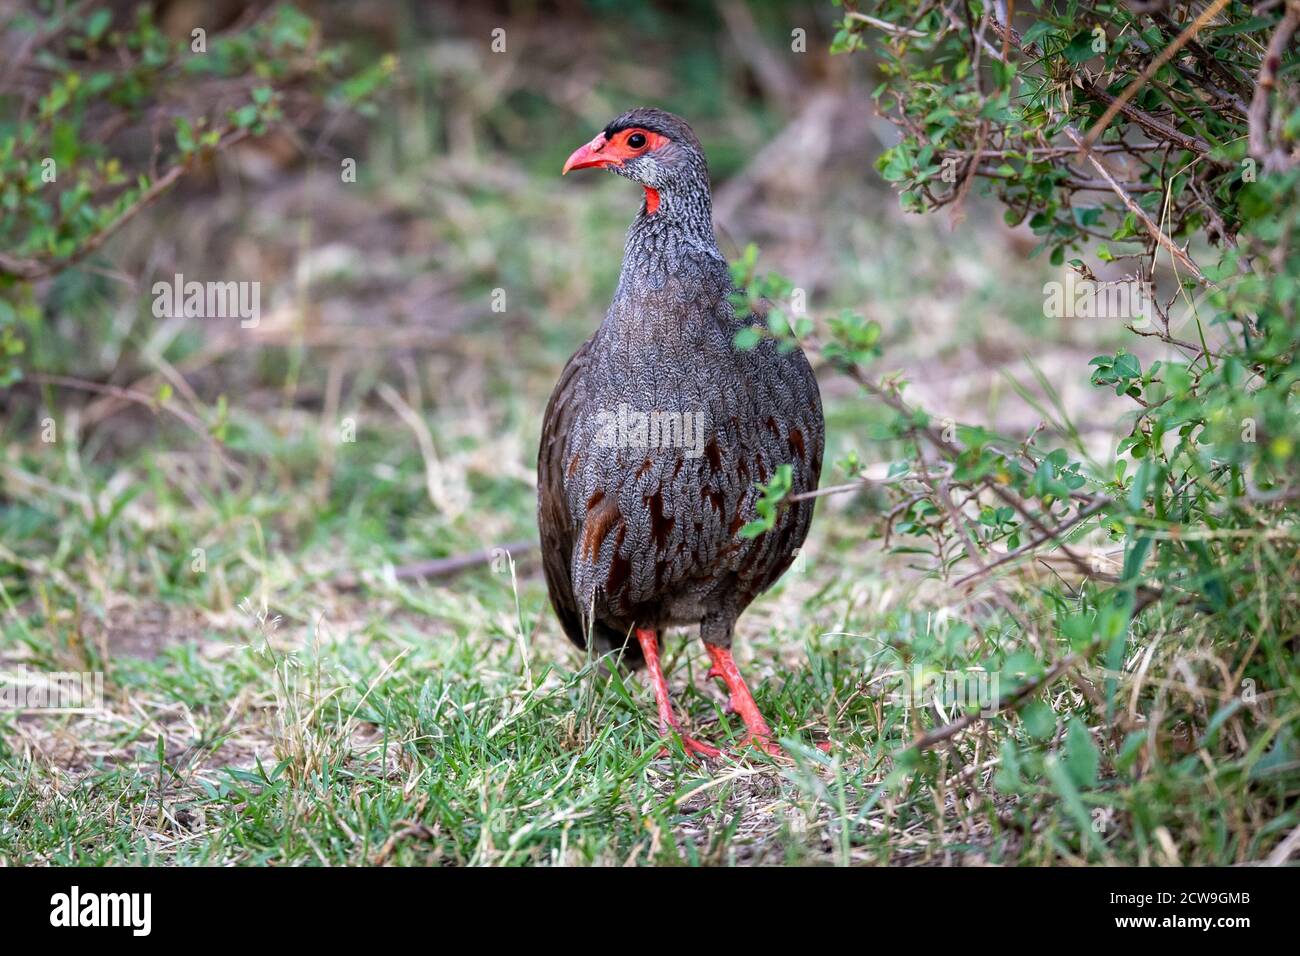 Red-necked spurfowl (Francolinus afer) standing in grass in Kenya Stock Photo